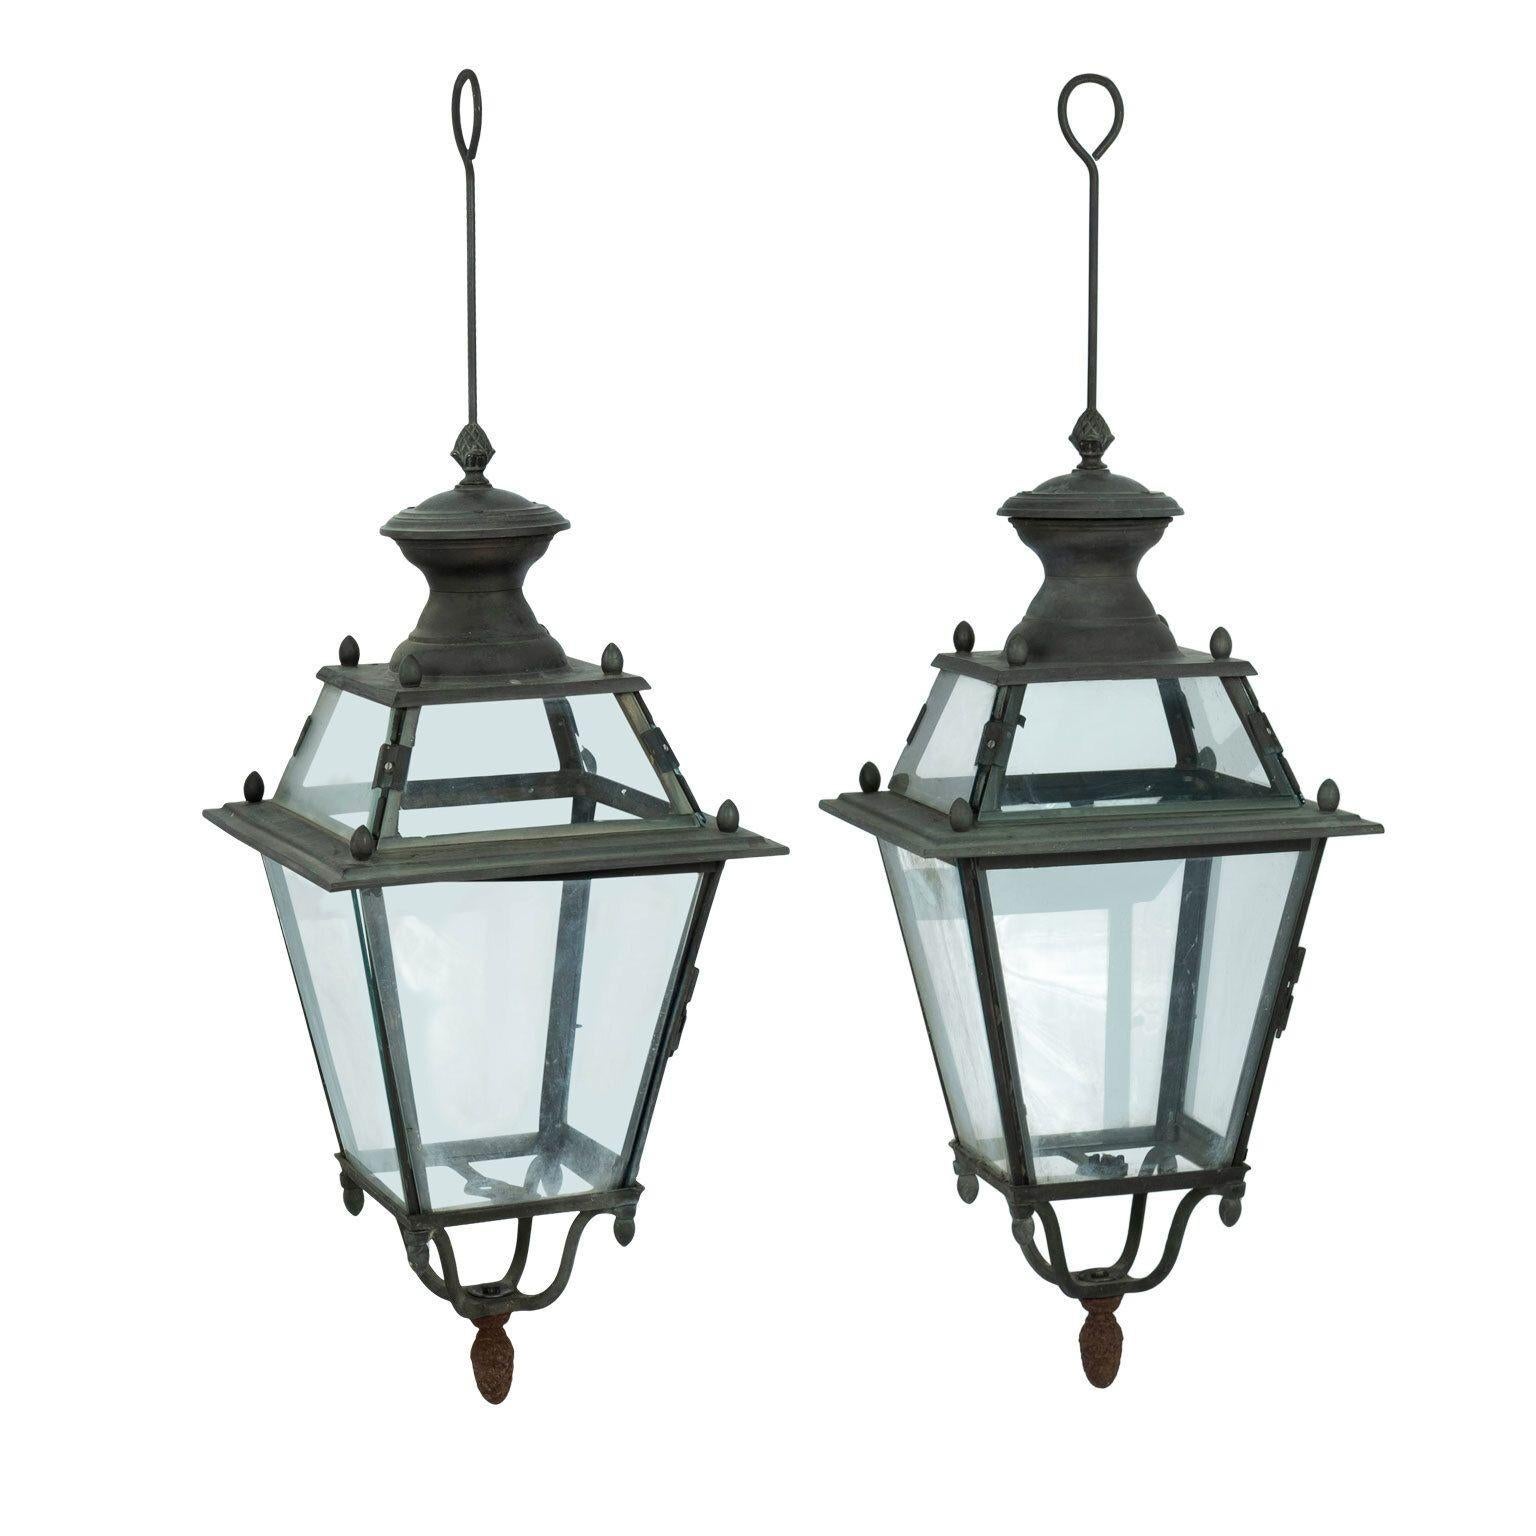 French Iron and Tole Glass-Paneled Lantern For Sale 2